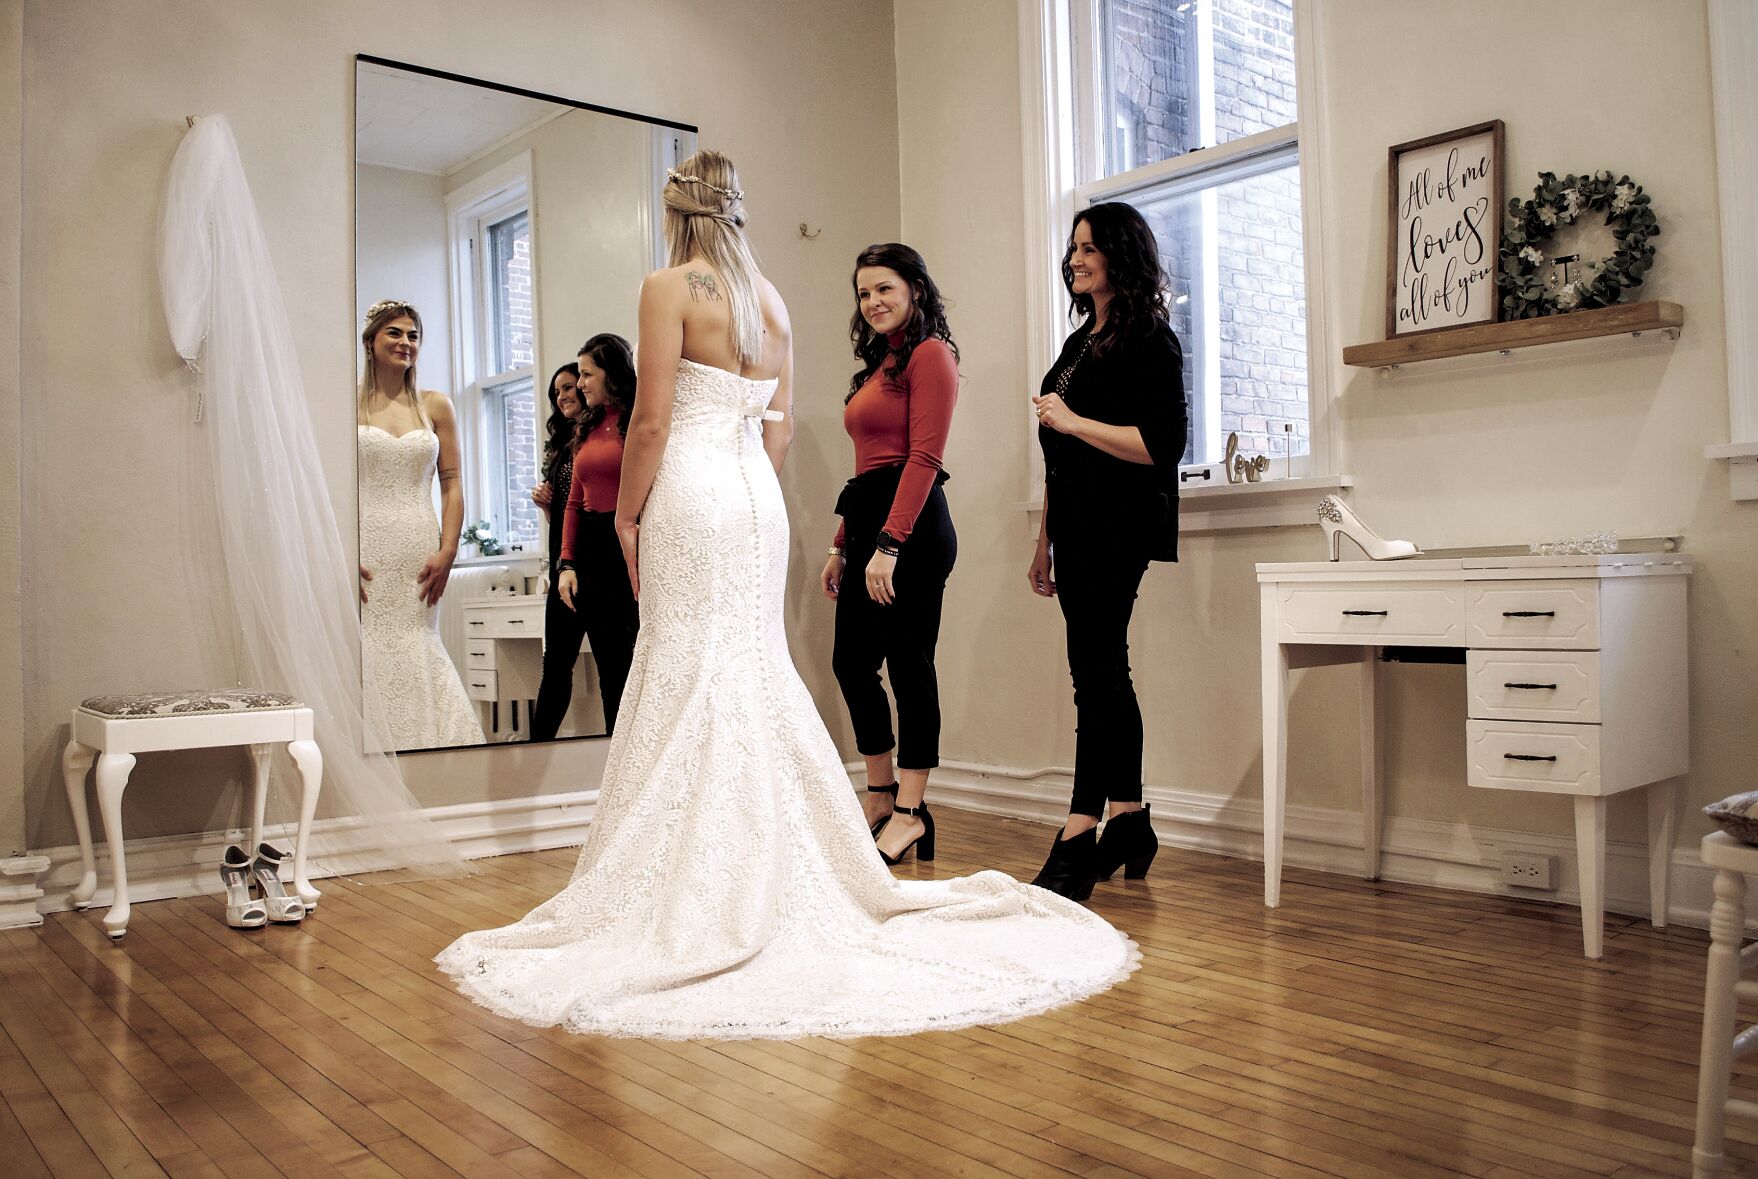 Co-owners Tomi Gill (right) and Hayley Mokros (center) help a bride-to-be at Bridal Boutique, 40 E. Main St. in Platteville, Wis. The store is celebrating 50 years in business.    PHOTO CREDIT: Contributed